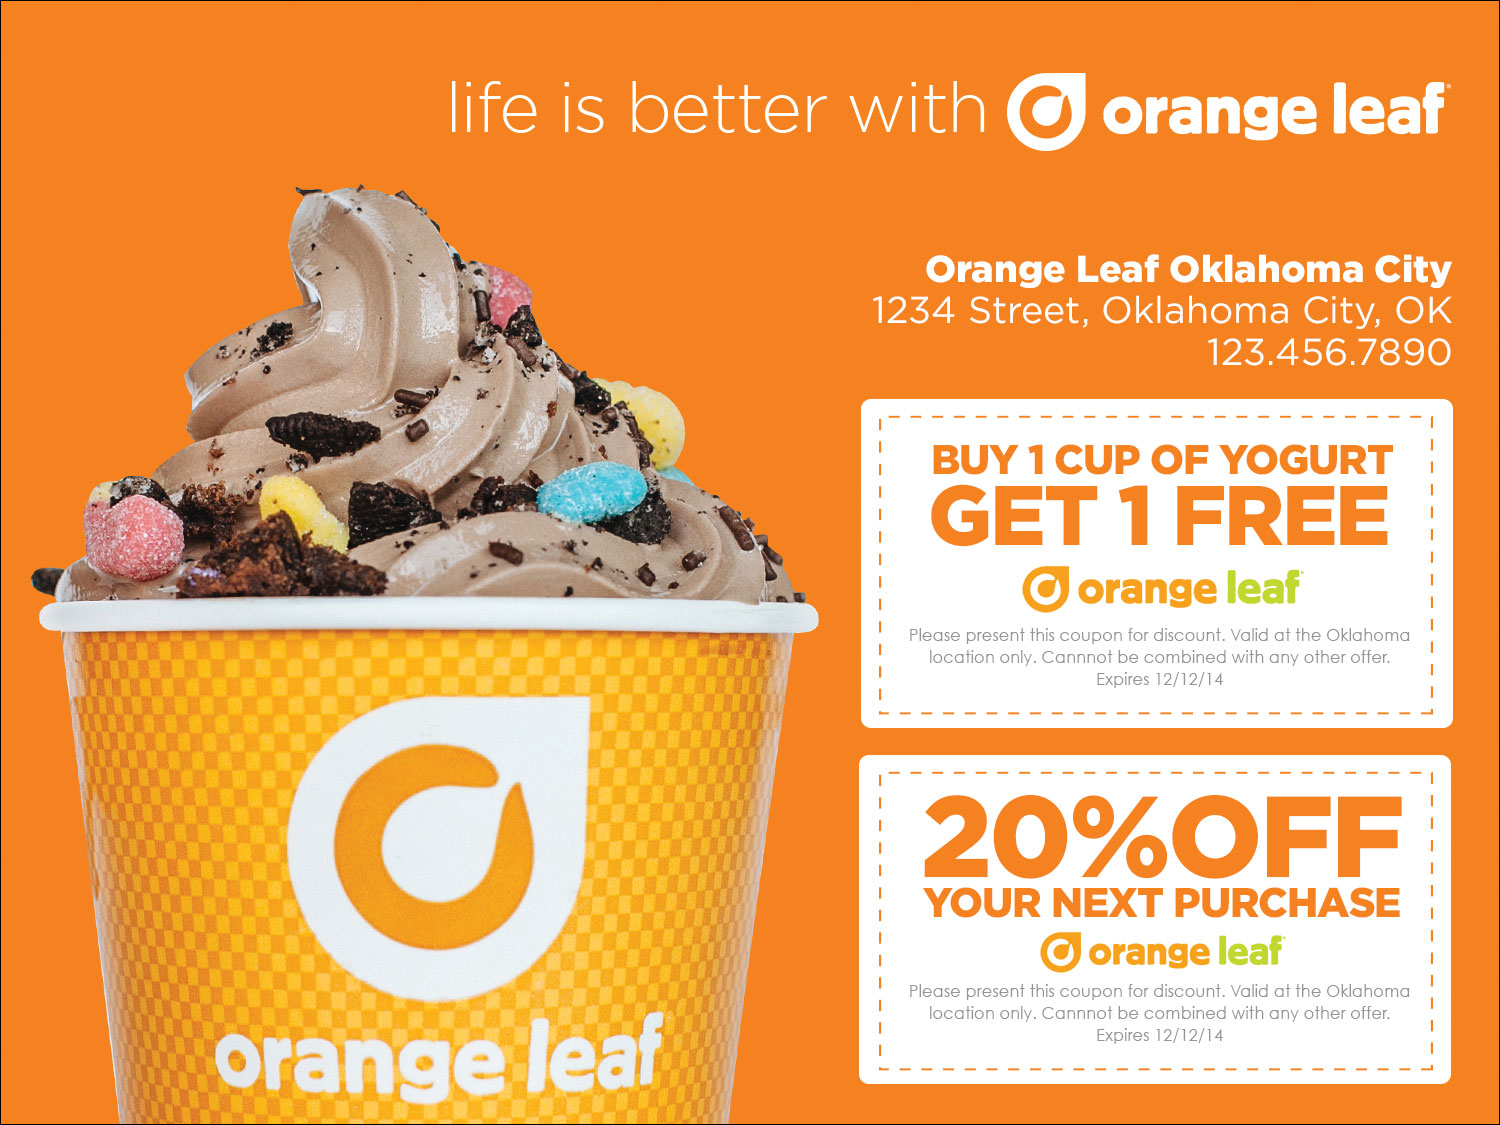 Advertisement shows an Orange leaf cup filled with yogurt. A text above the cup reads "life is better with orange leaf." Text alongside reads "Buy 1 cup of yogurt, Get 1 cup Free" "20 percent off on your next purchase."